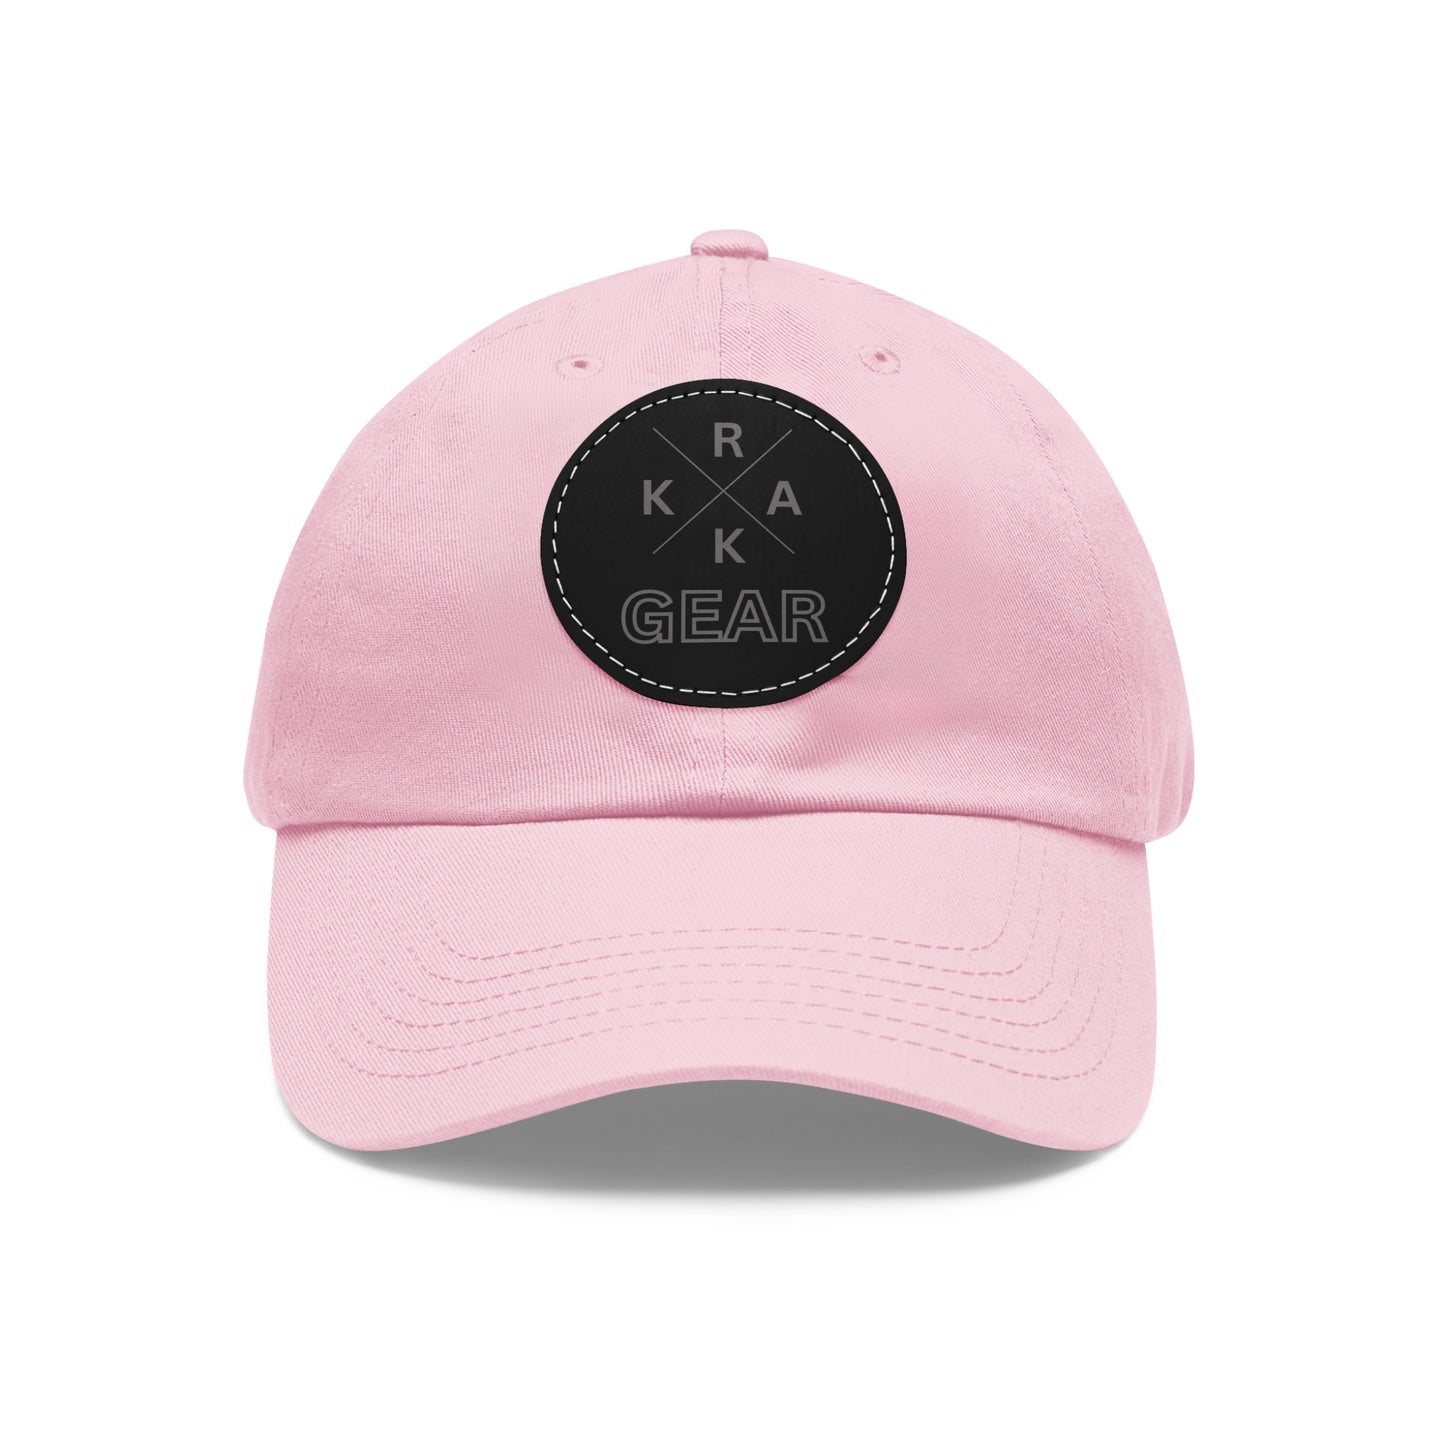 Rakkgear Pink Hat with Black Leather X Logo Patch: Cap featuring the iconic Rakkgear X Logo on a finely embroidered leather patch on the front